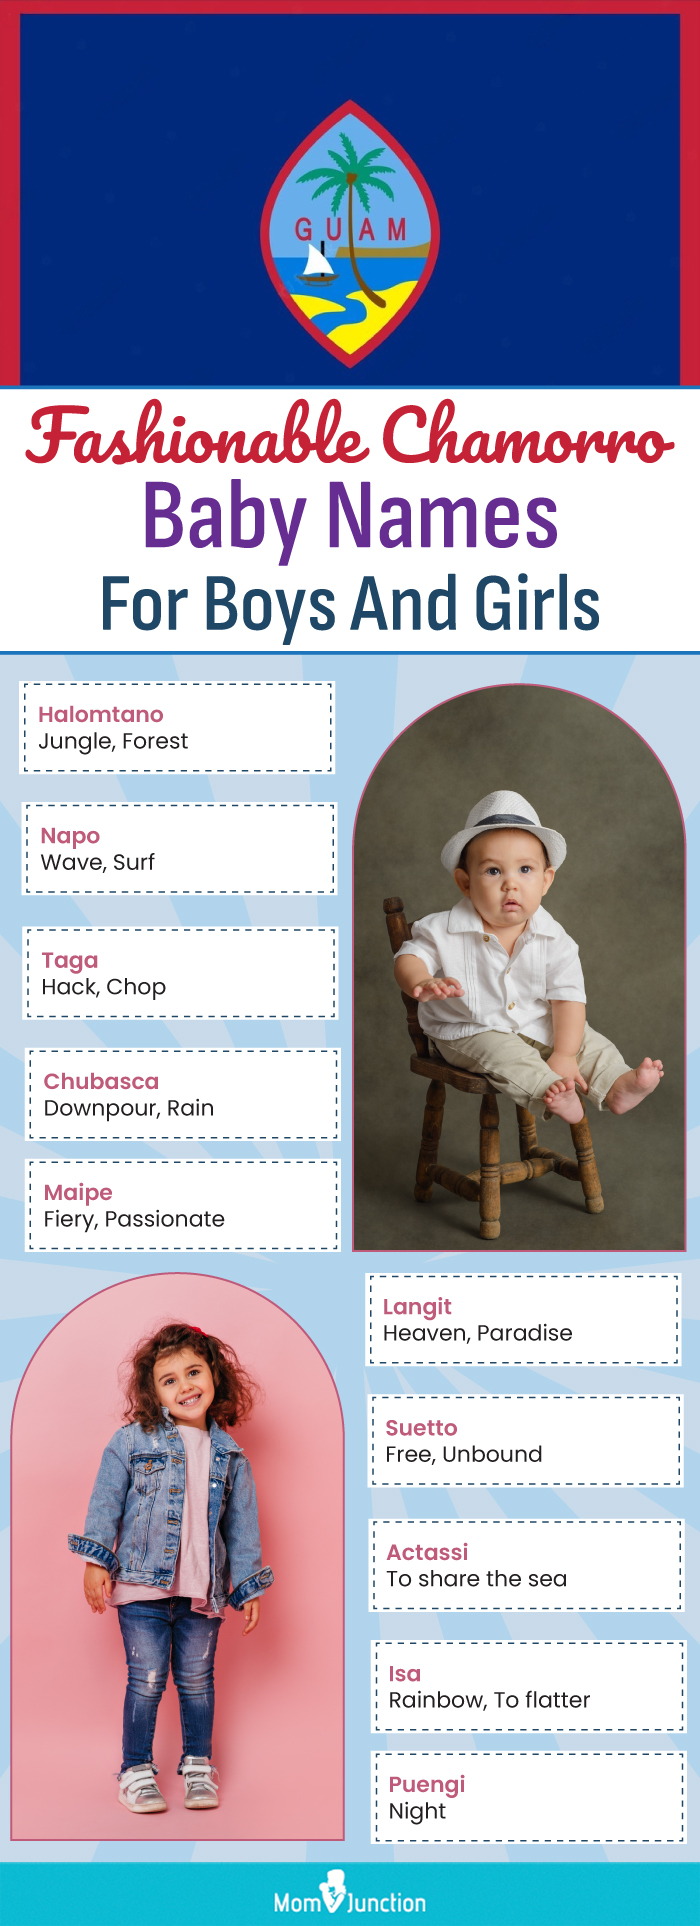 fashionable chamorro baby names for boys and girls (infographic)